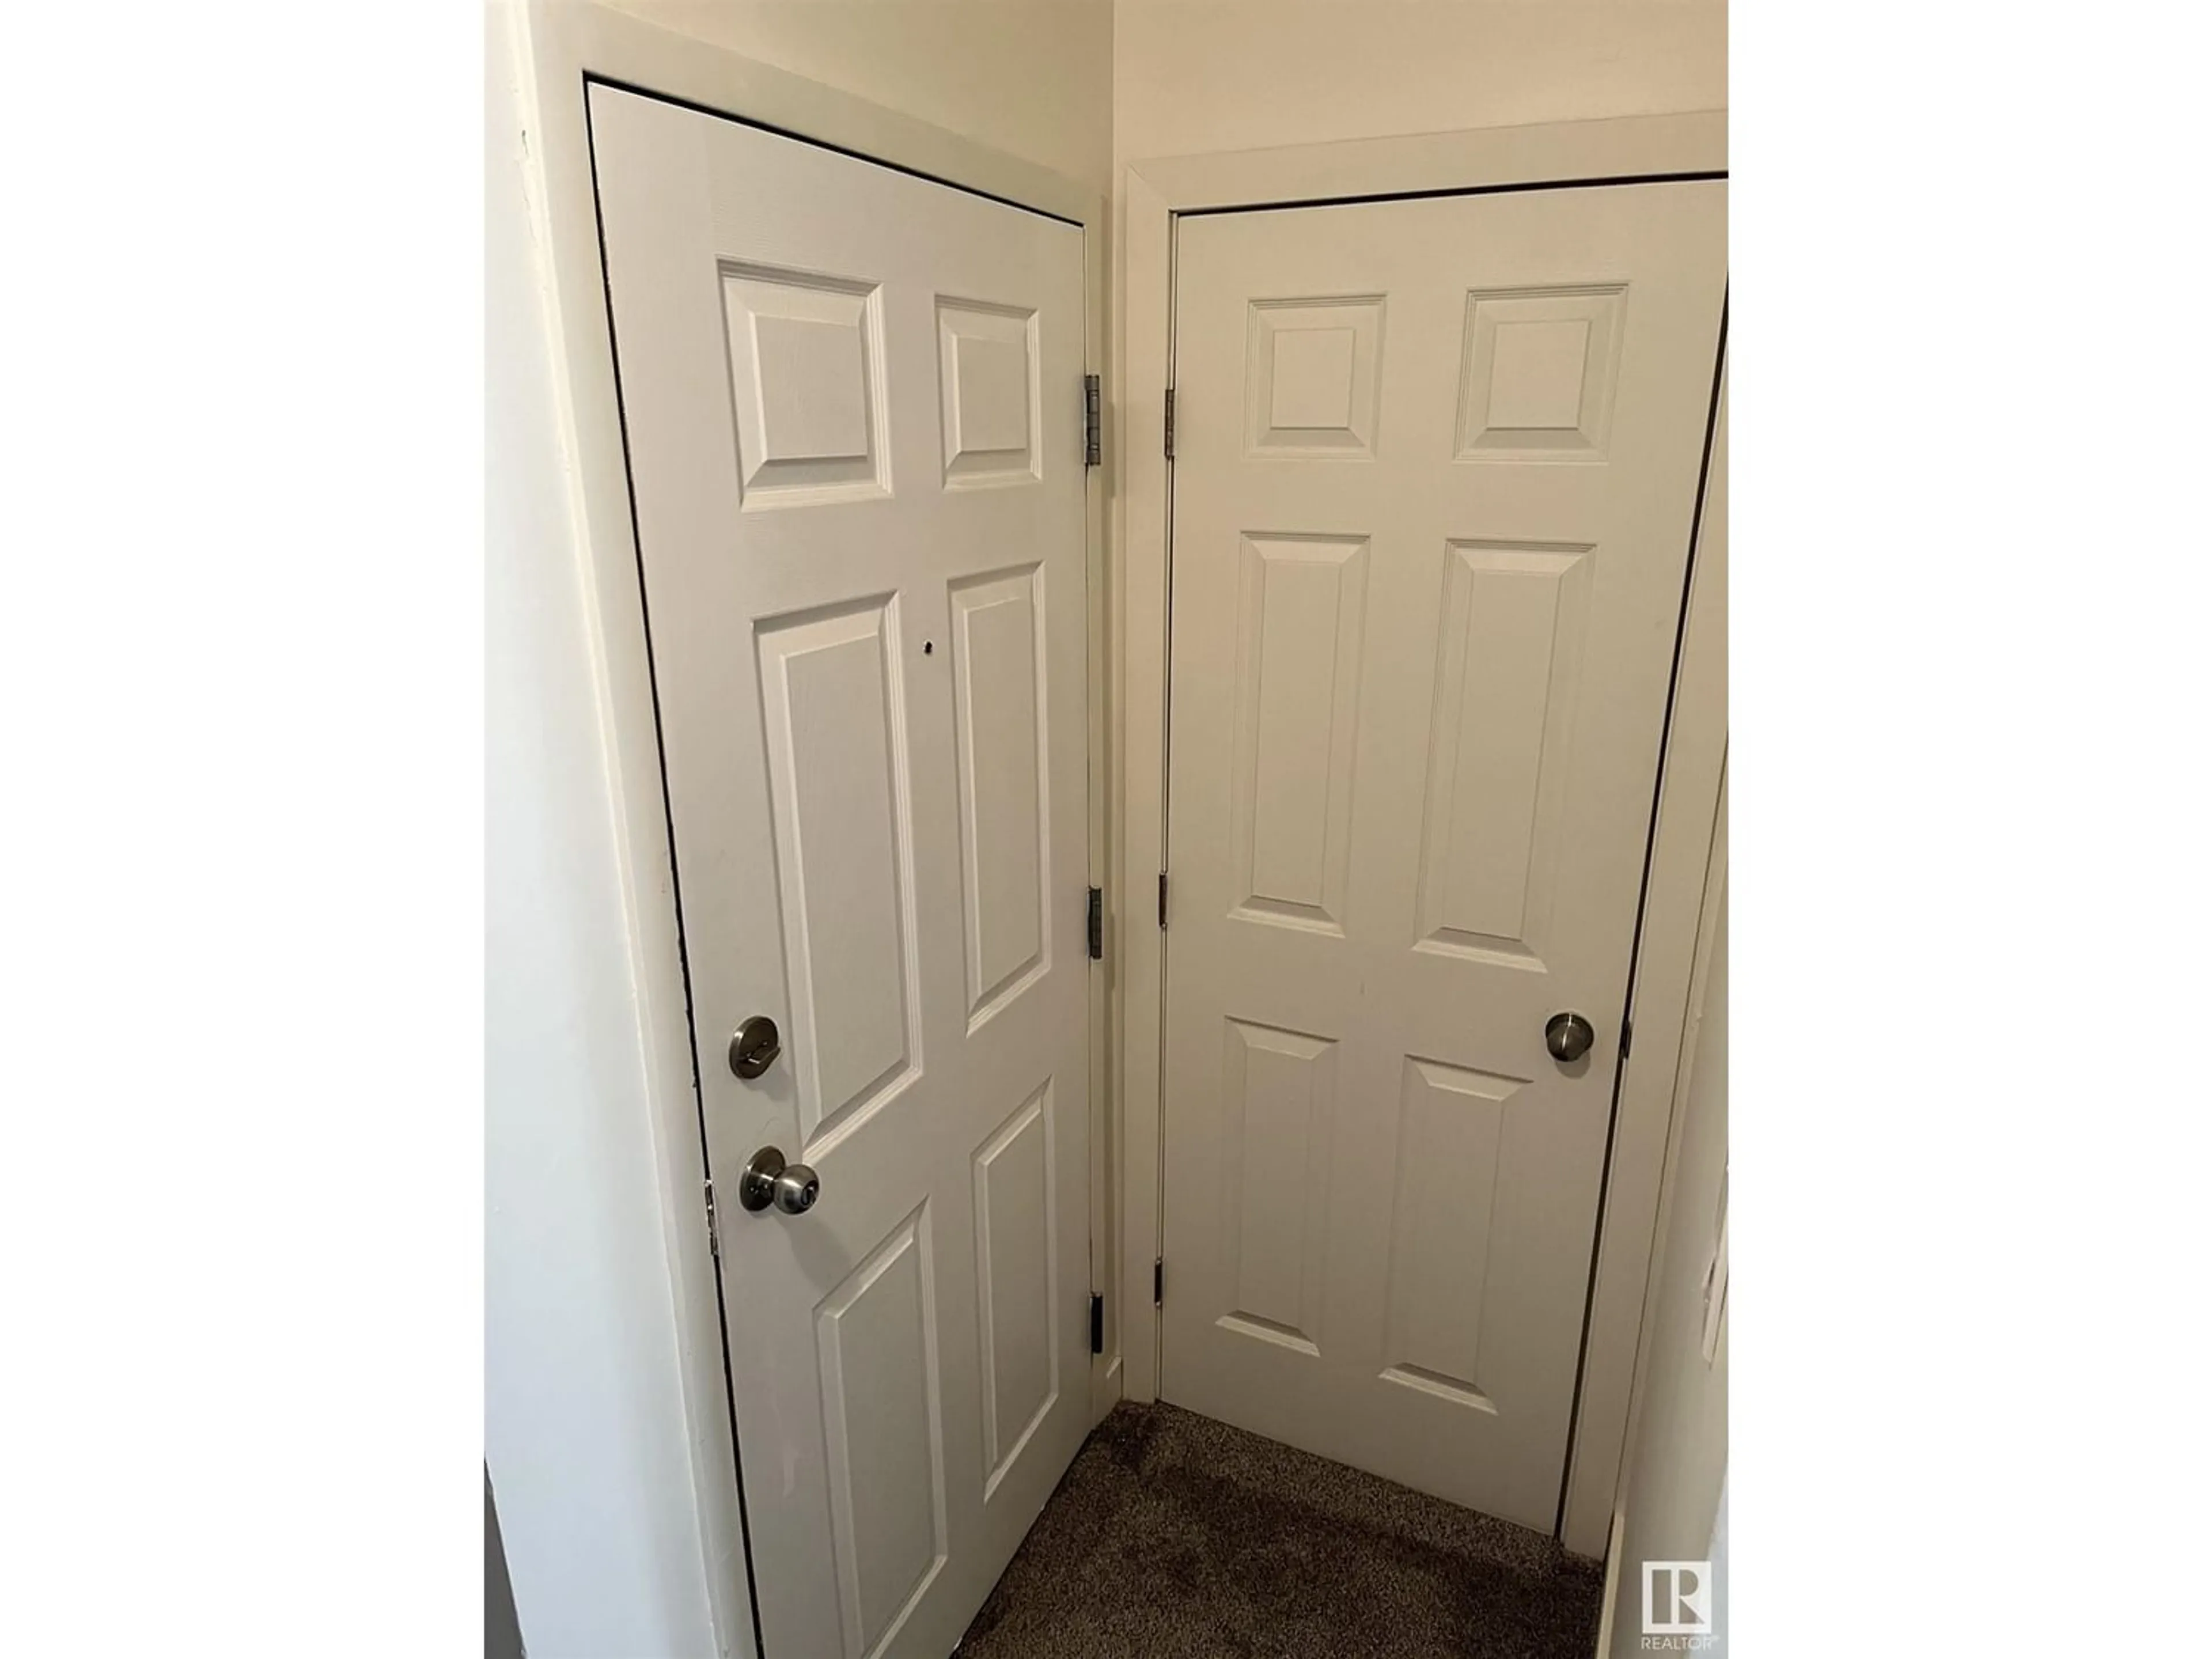 Storage room or clothes room or walk-in closet for #204 9120 106 AV NW, Edmonton Alberta T5H0M9